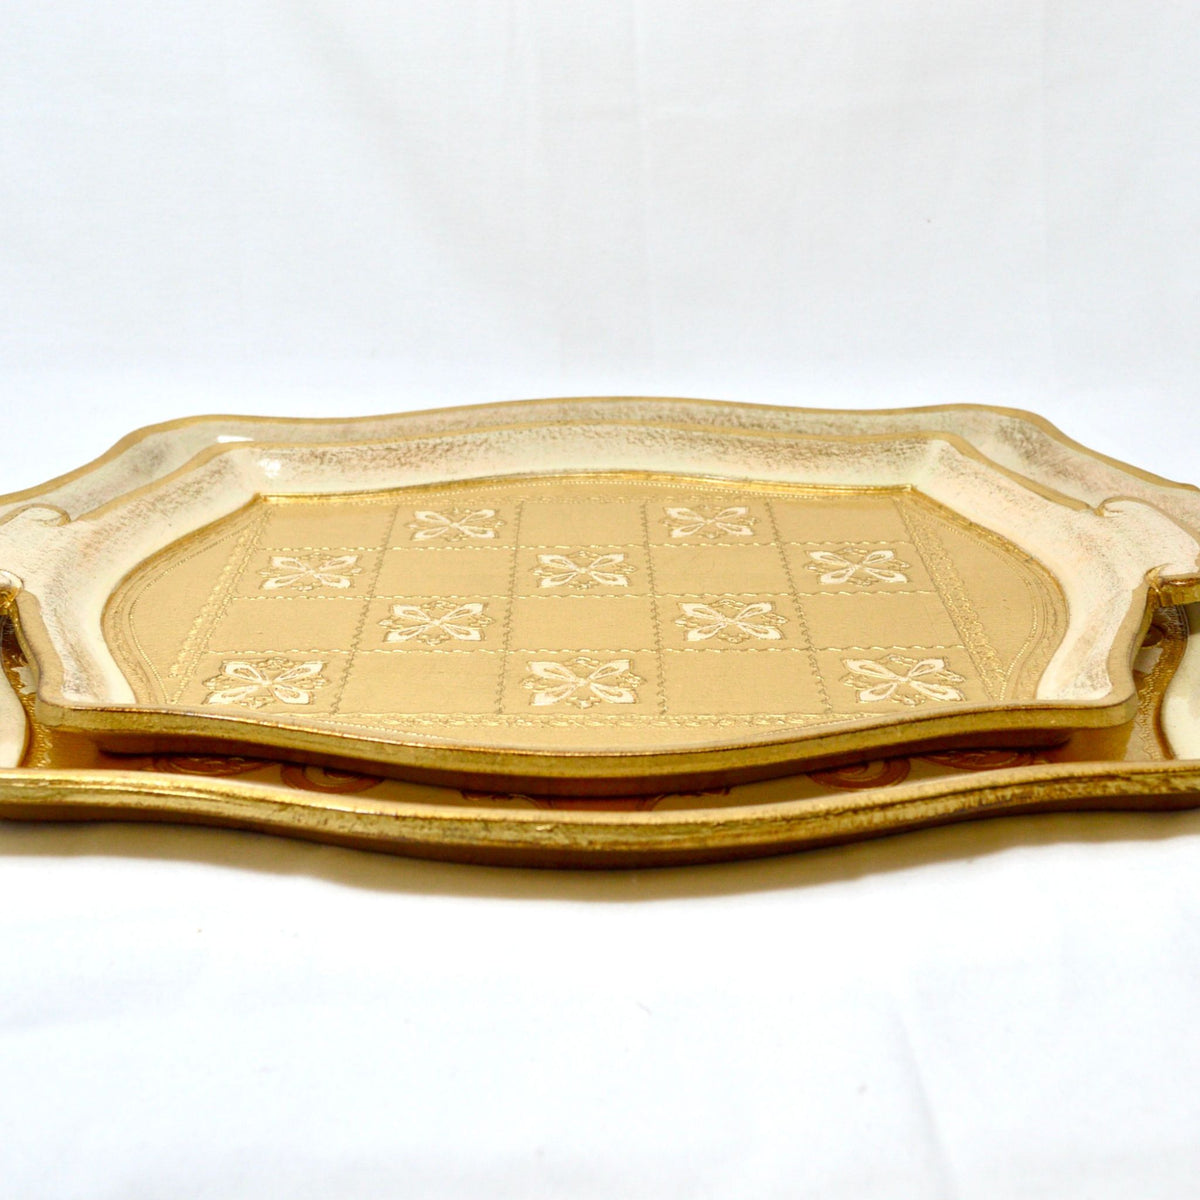 Florentine Carved Wood Tray, Cappuccino, Large or Small, Made in Italy - My Italian Decor